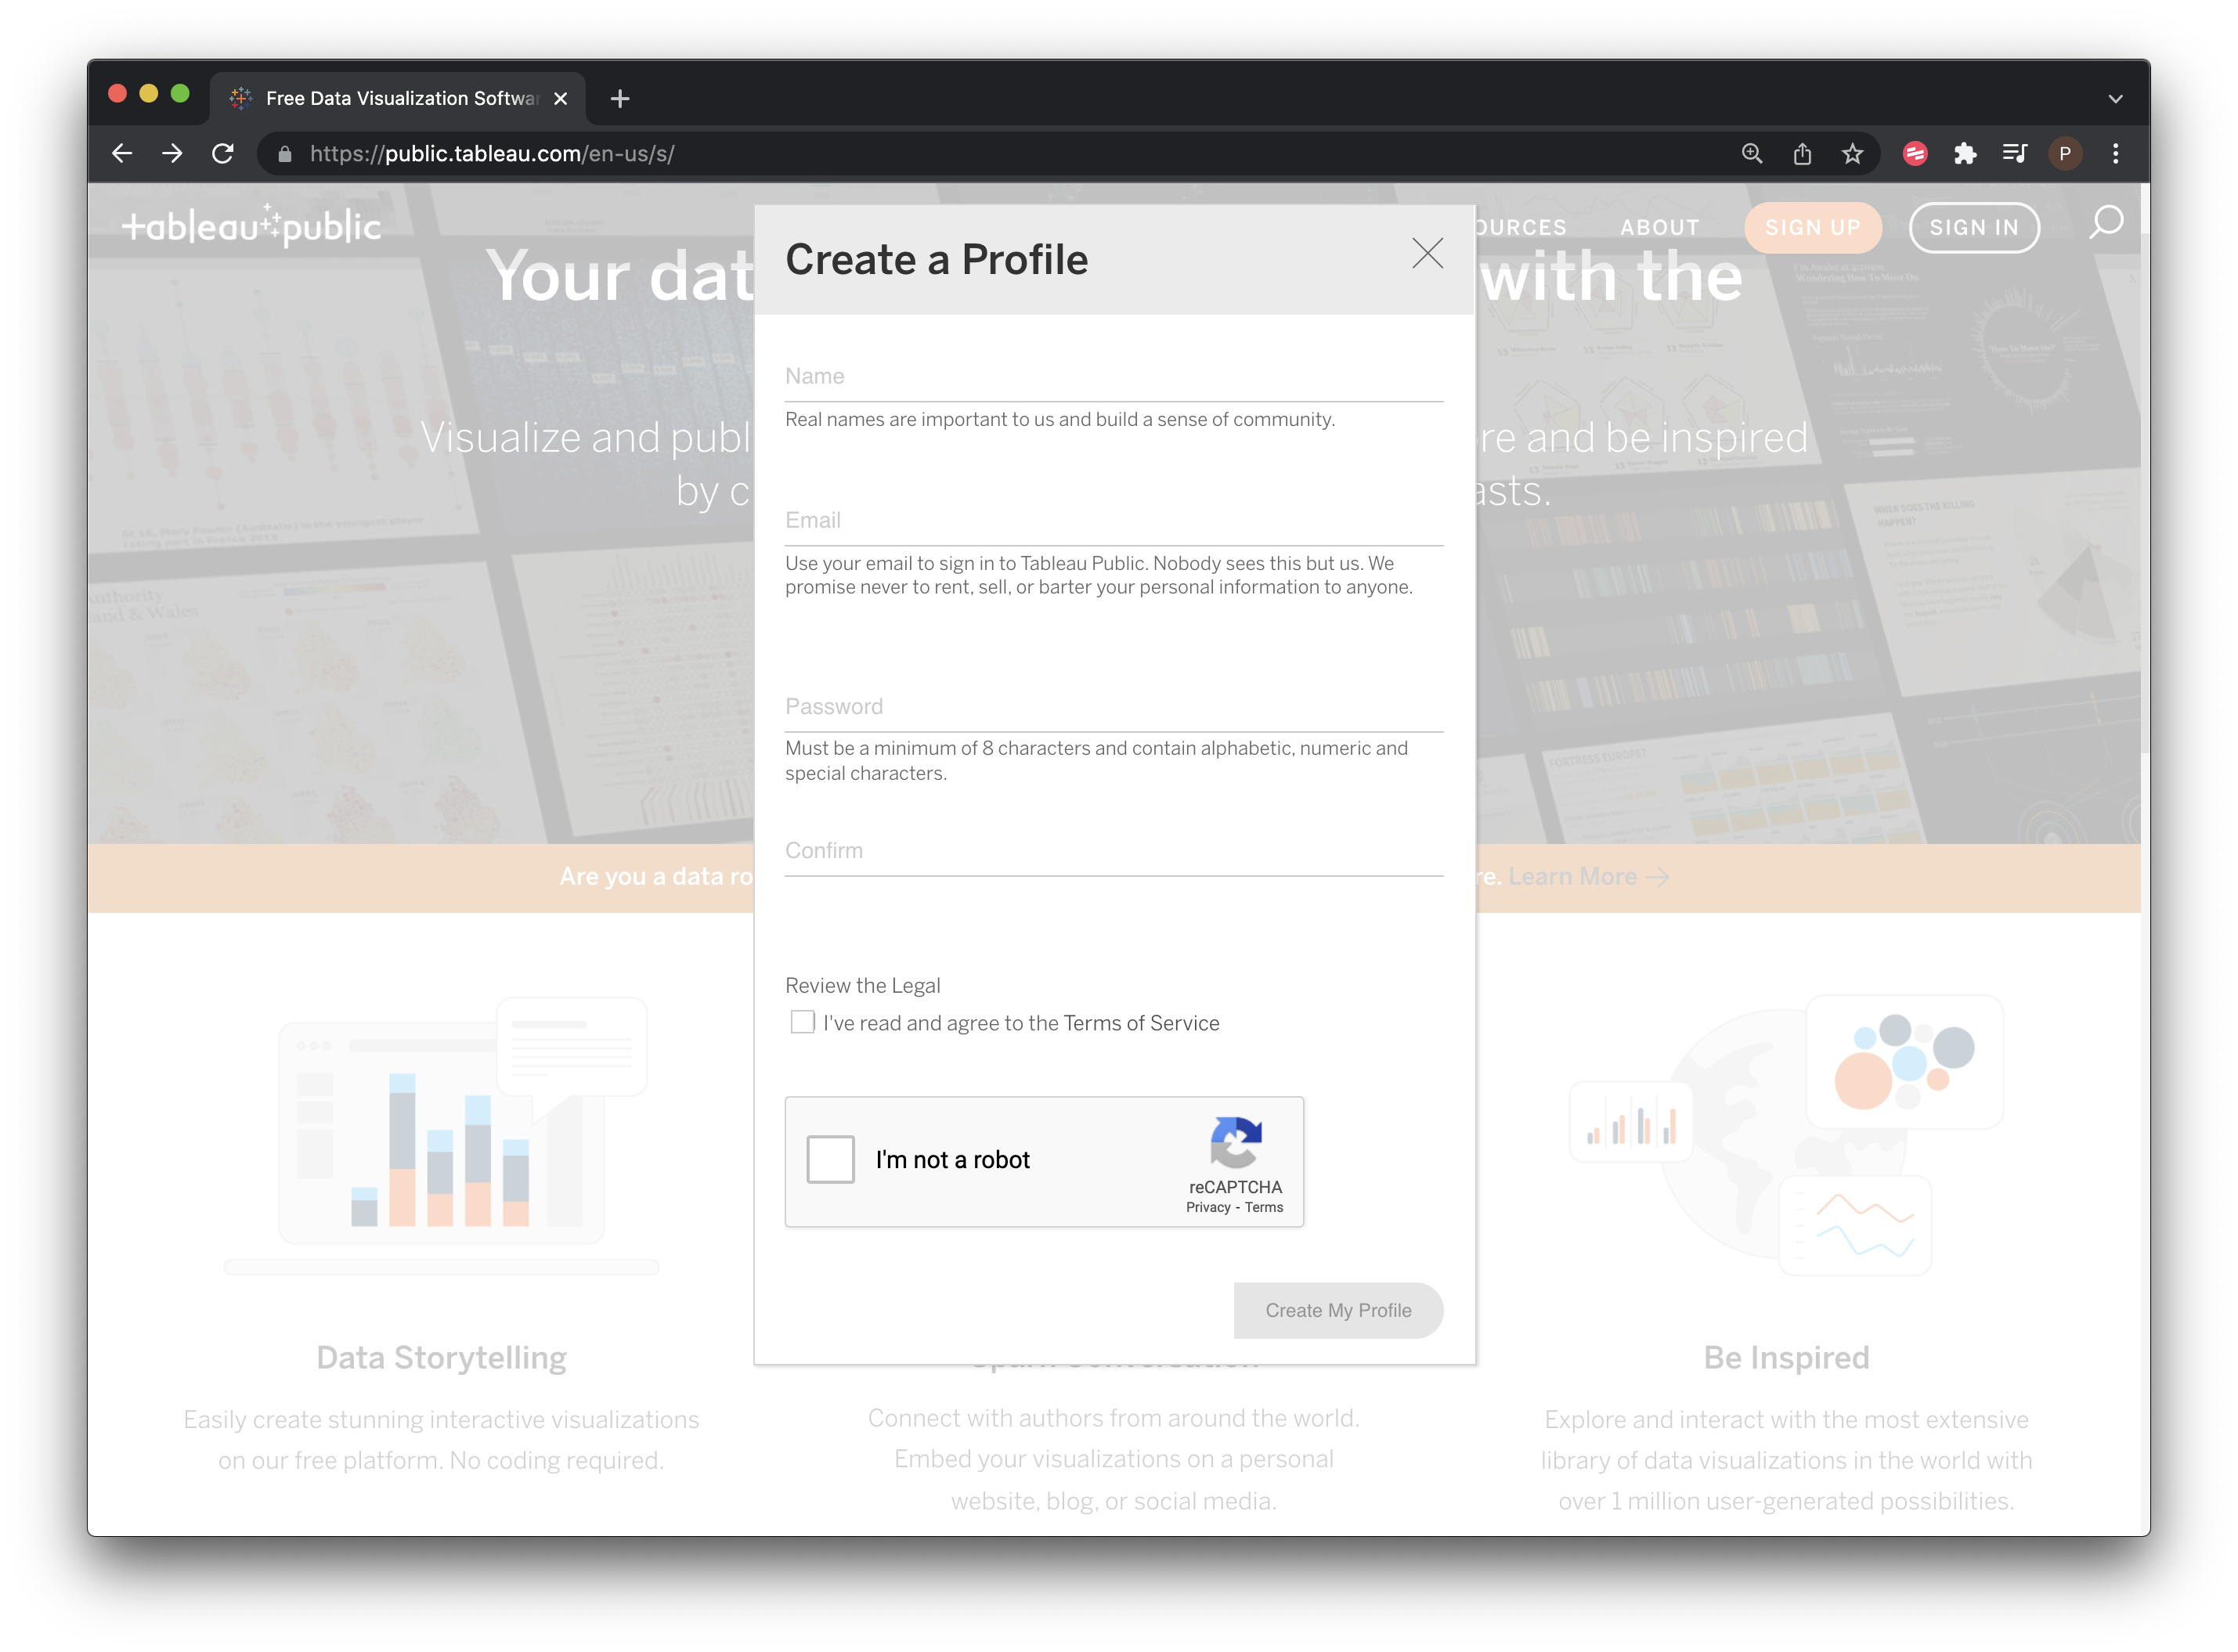 Sign Up for a Free Tableau Account